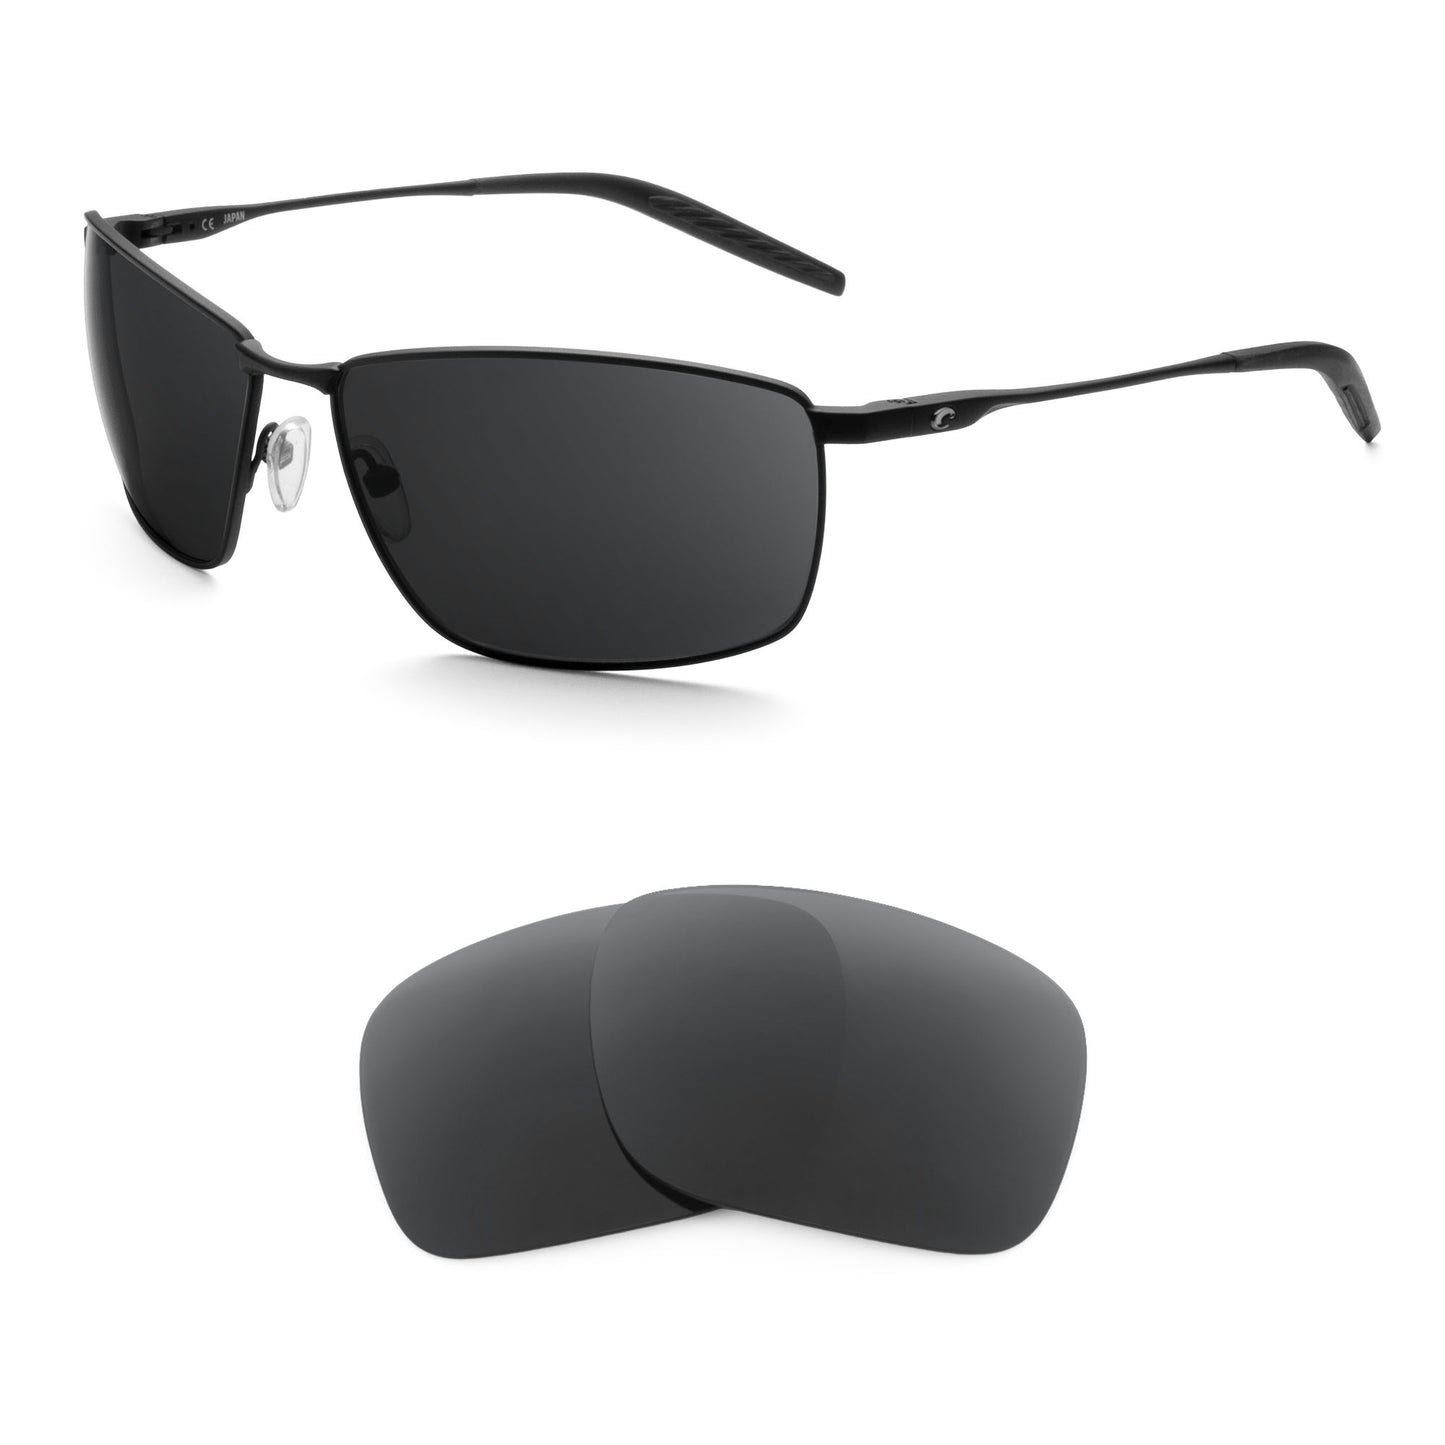 Costa Turret sunglasses with replacement lenses